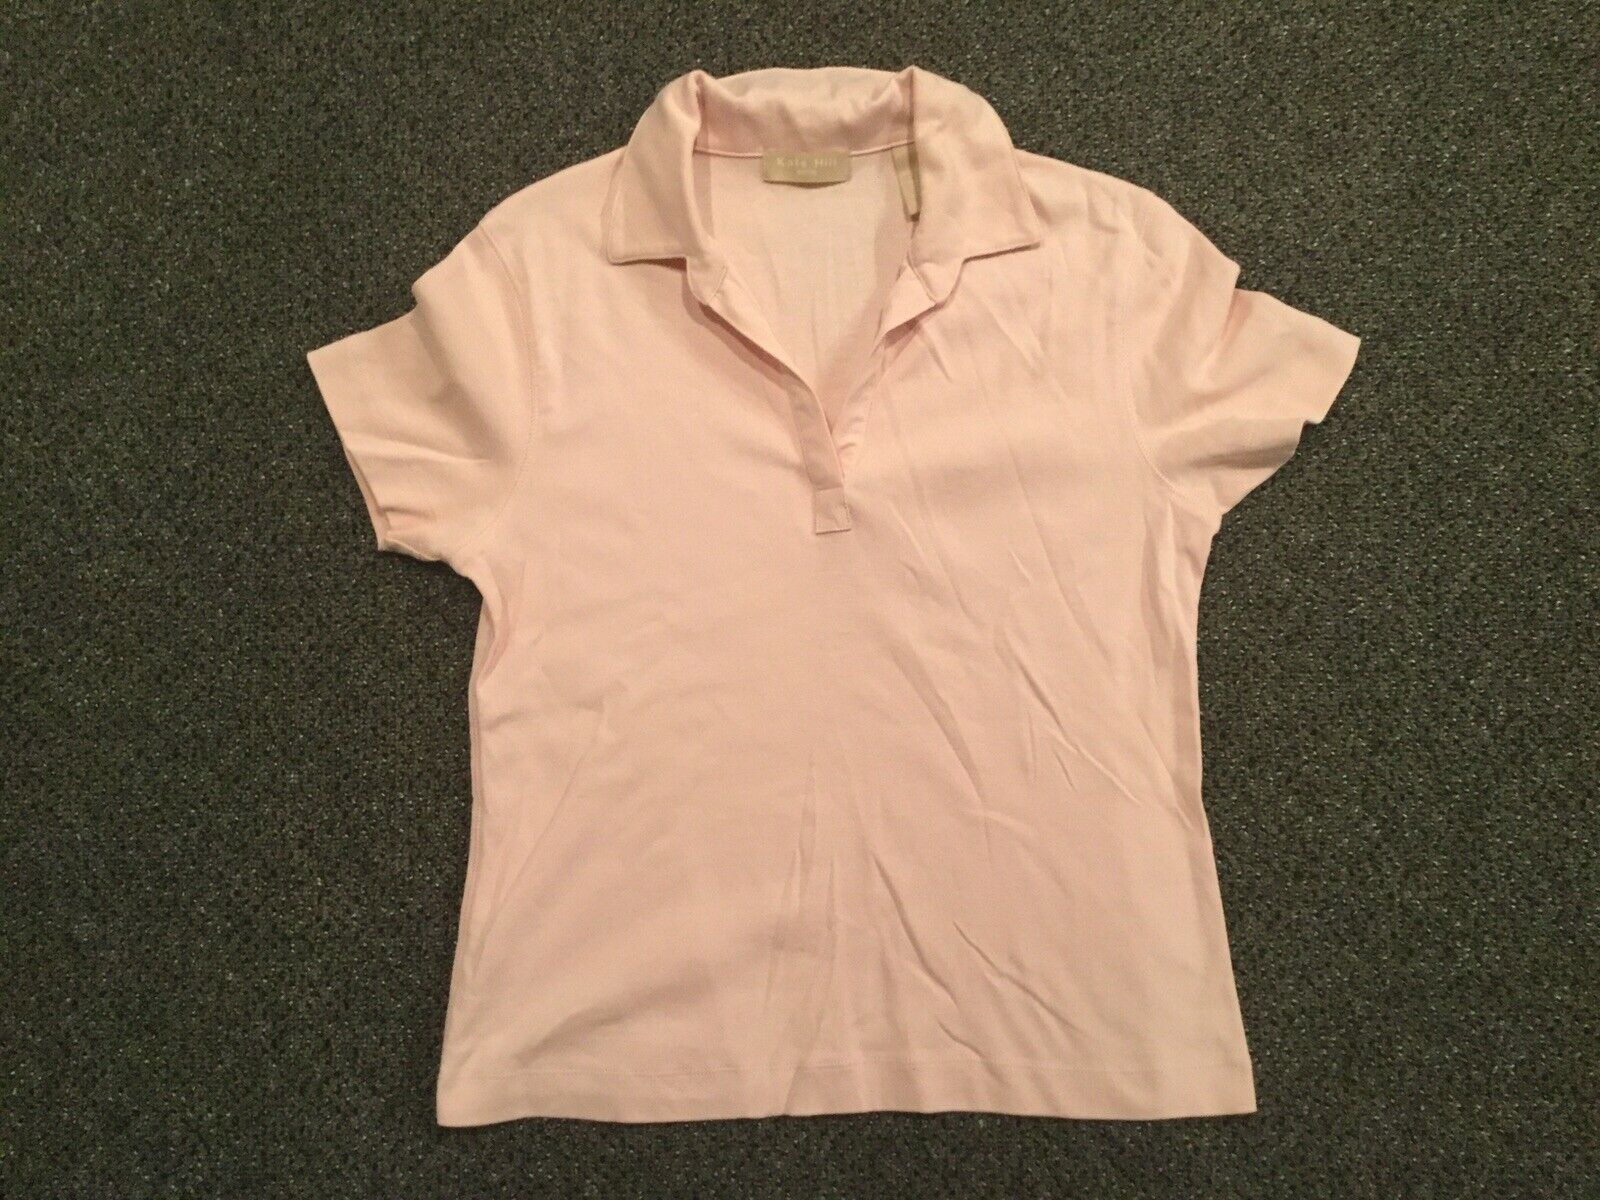 Primary image for Kate Hill Petite Polo Shirt, Size PM